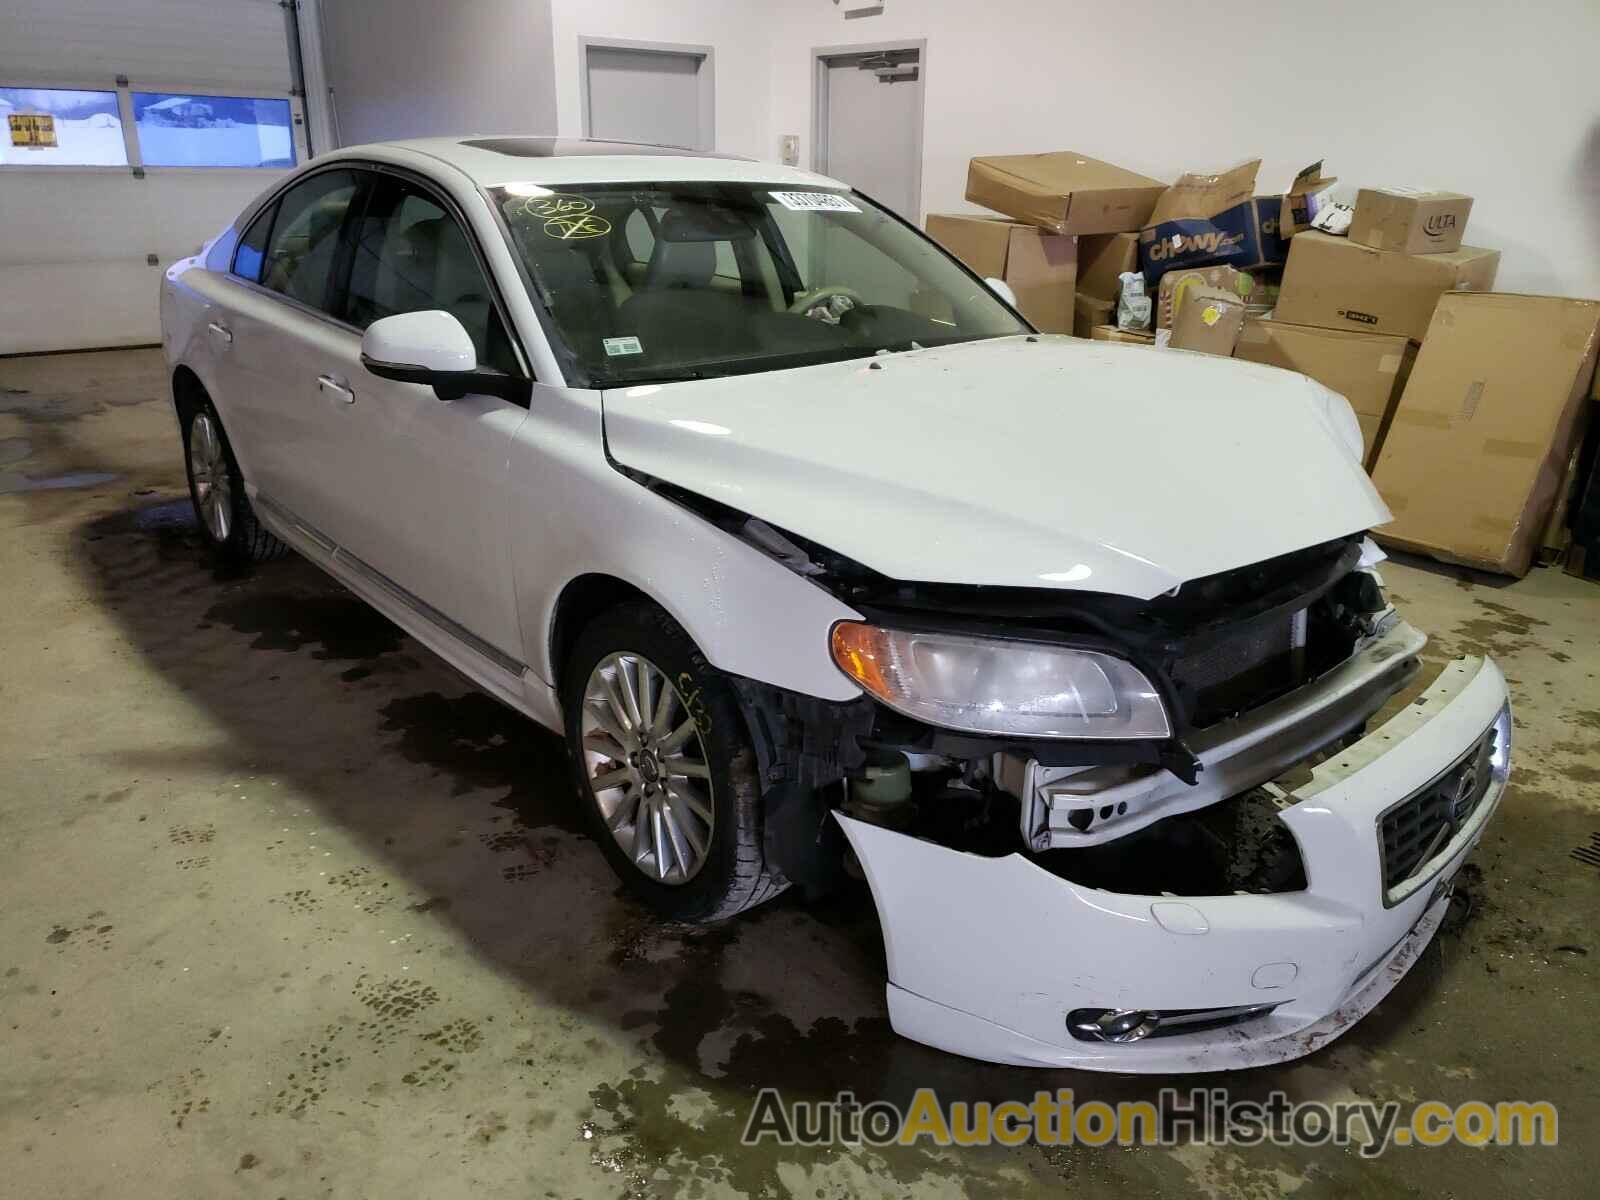 2013 VOLVO S80 3.2, YV1952AS8D1167110